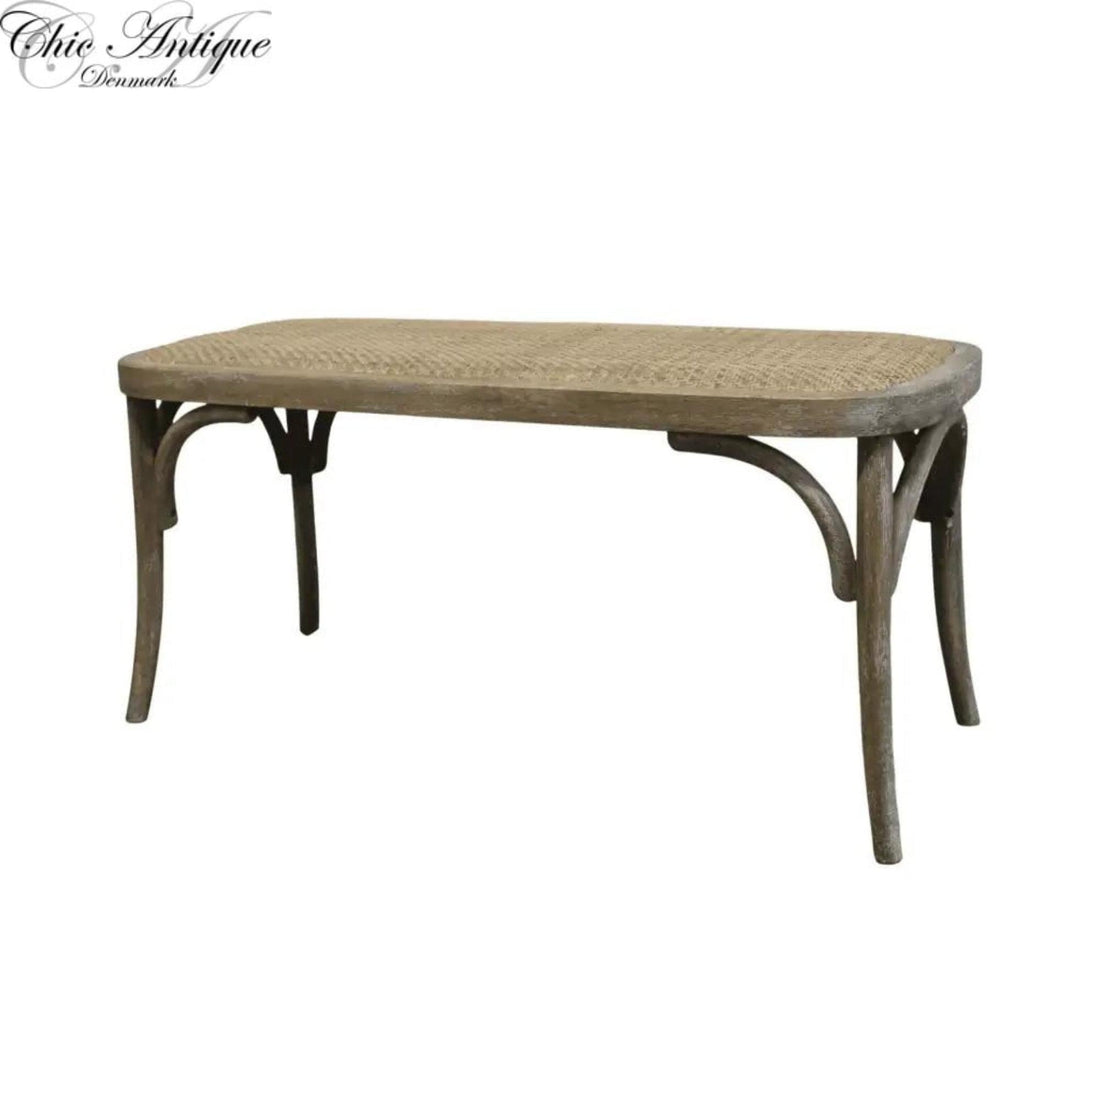 Chic Antique Bench Rattan in French weave